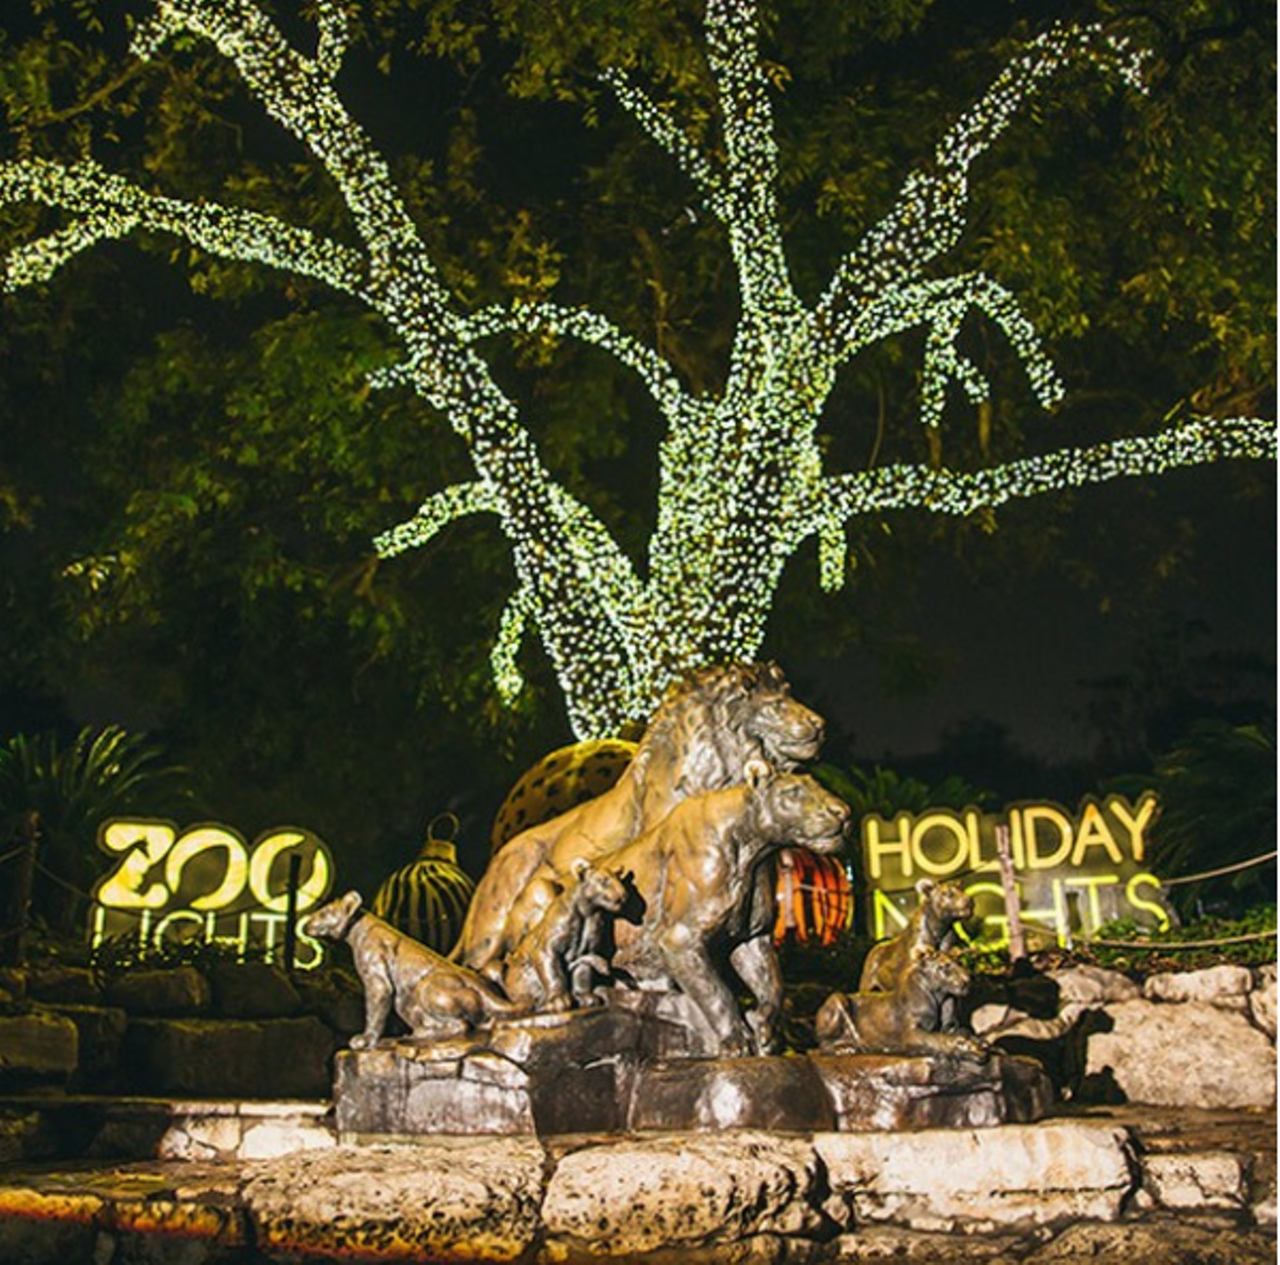 San Antonio Zoo
3903 N St Mary's St.,  sazoo.org
Get Merry & Bright at the San Antonio Zoo this season and stroll under twinkling lights as you sip hot chocolate and check out the zoo's new show. Also, new this year is the ice skating rink and camel rides. 
Photo via Instagram,  hilton_sanantonioairport
